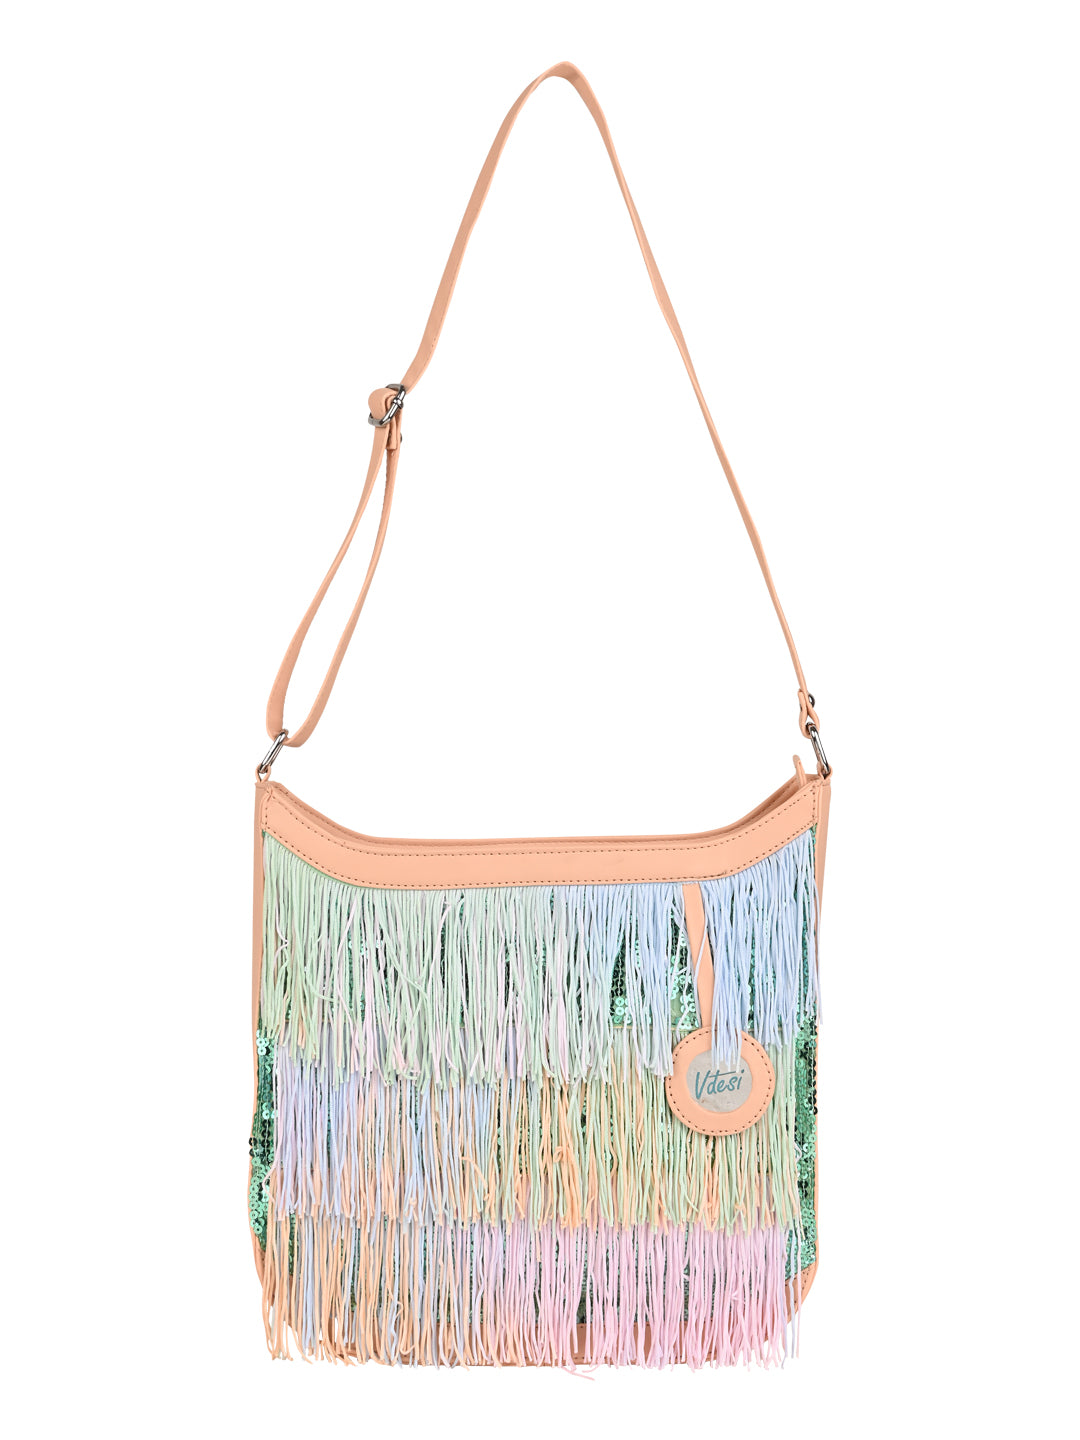 A fringe tote bag on a white background. 